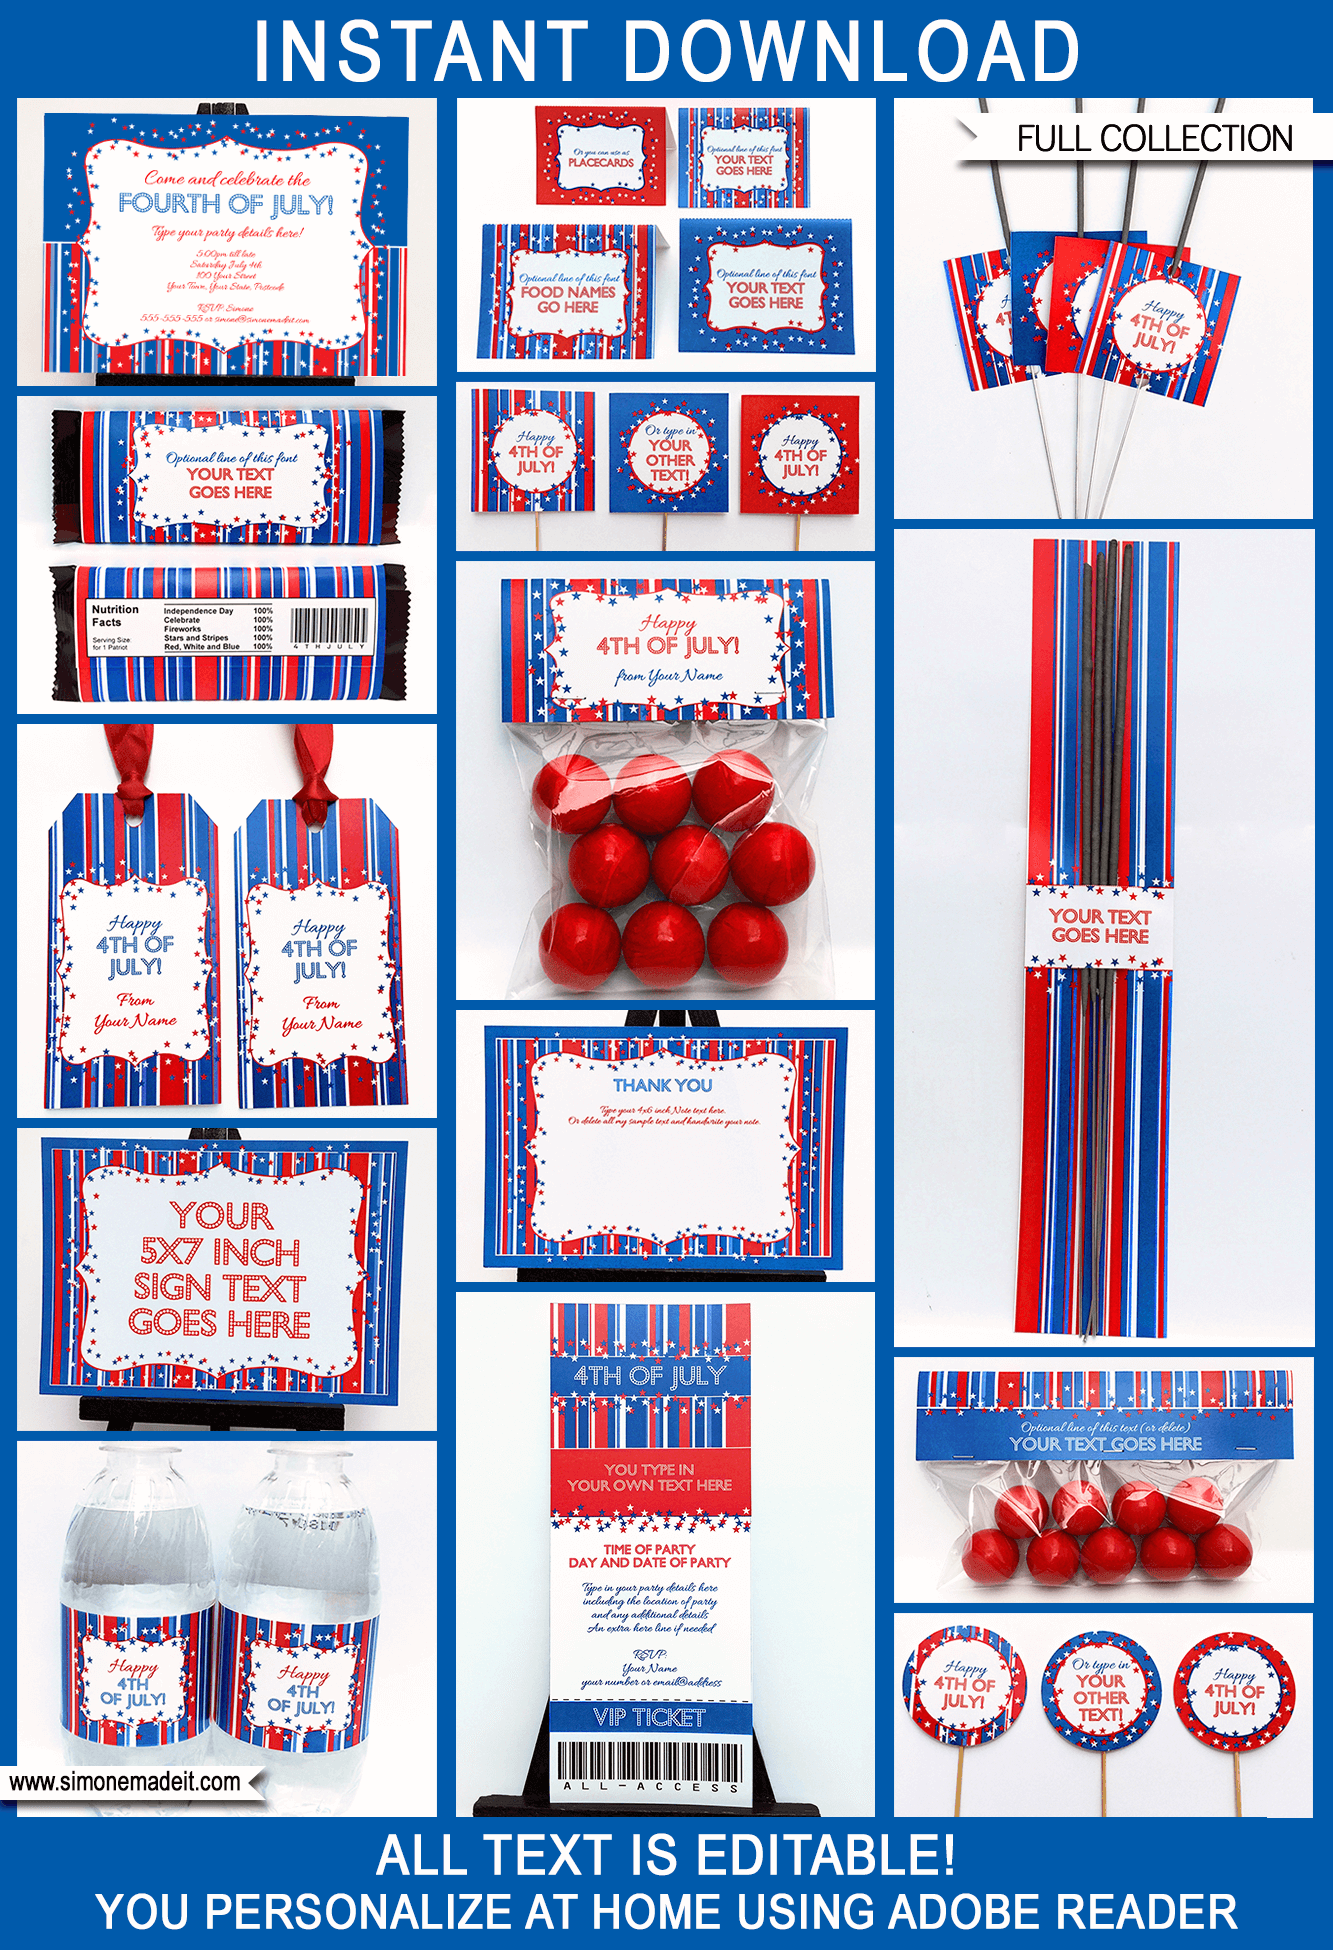 Fourth of July Party Printables, Invitations & Decorations | 4th of July Theme | July 4th | DIY Editable Templates | INSTANT DOWNLOAD $9.00 via SIMONEmadeit.com 